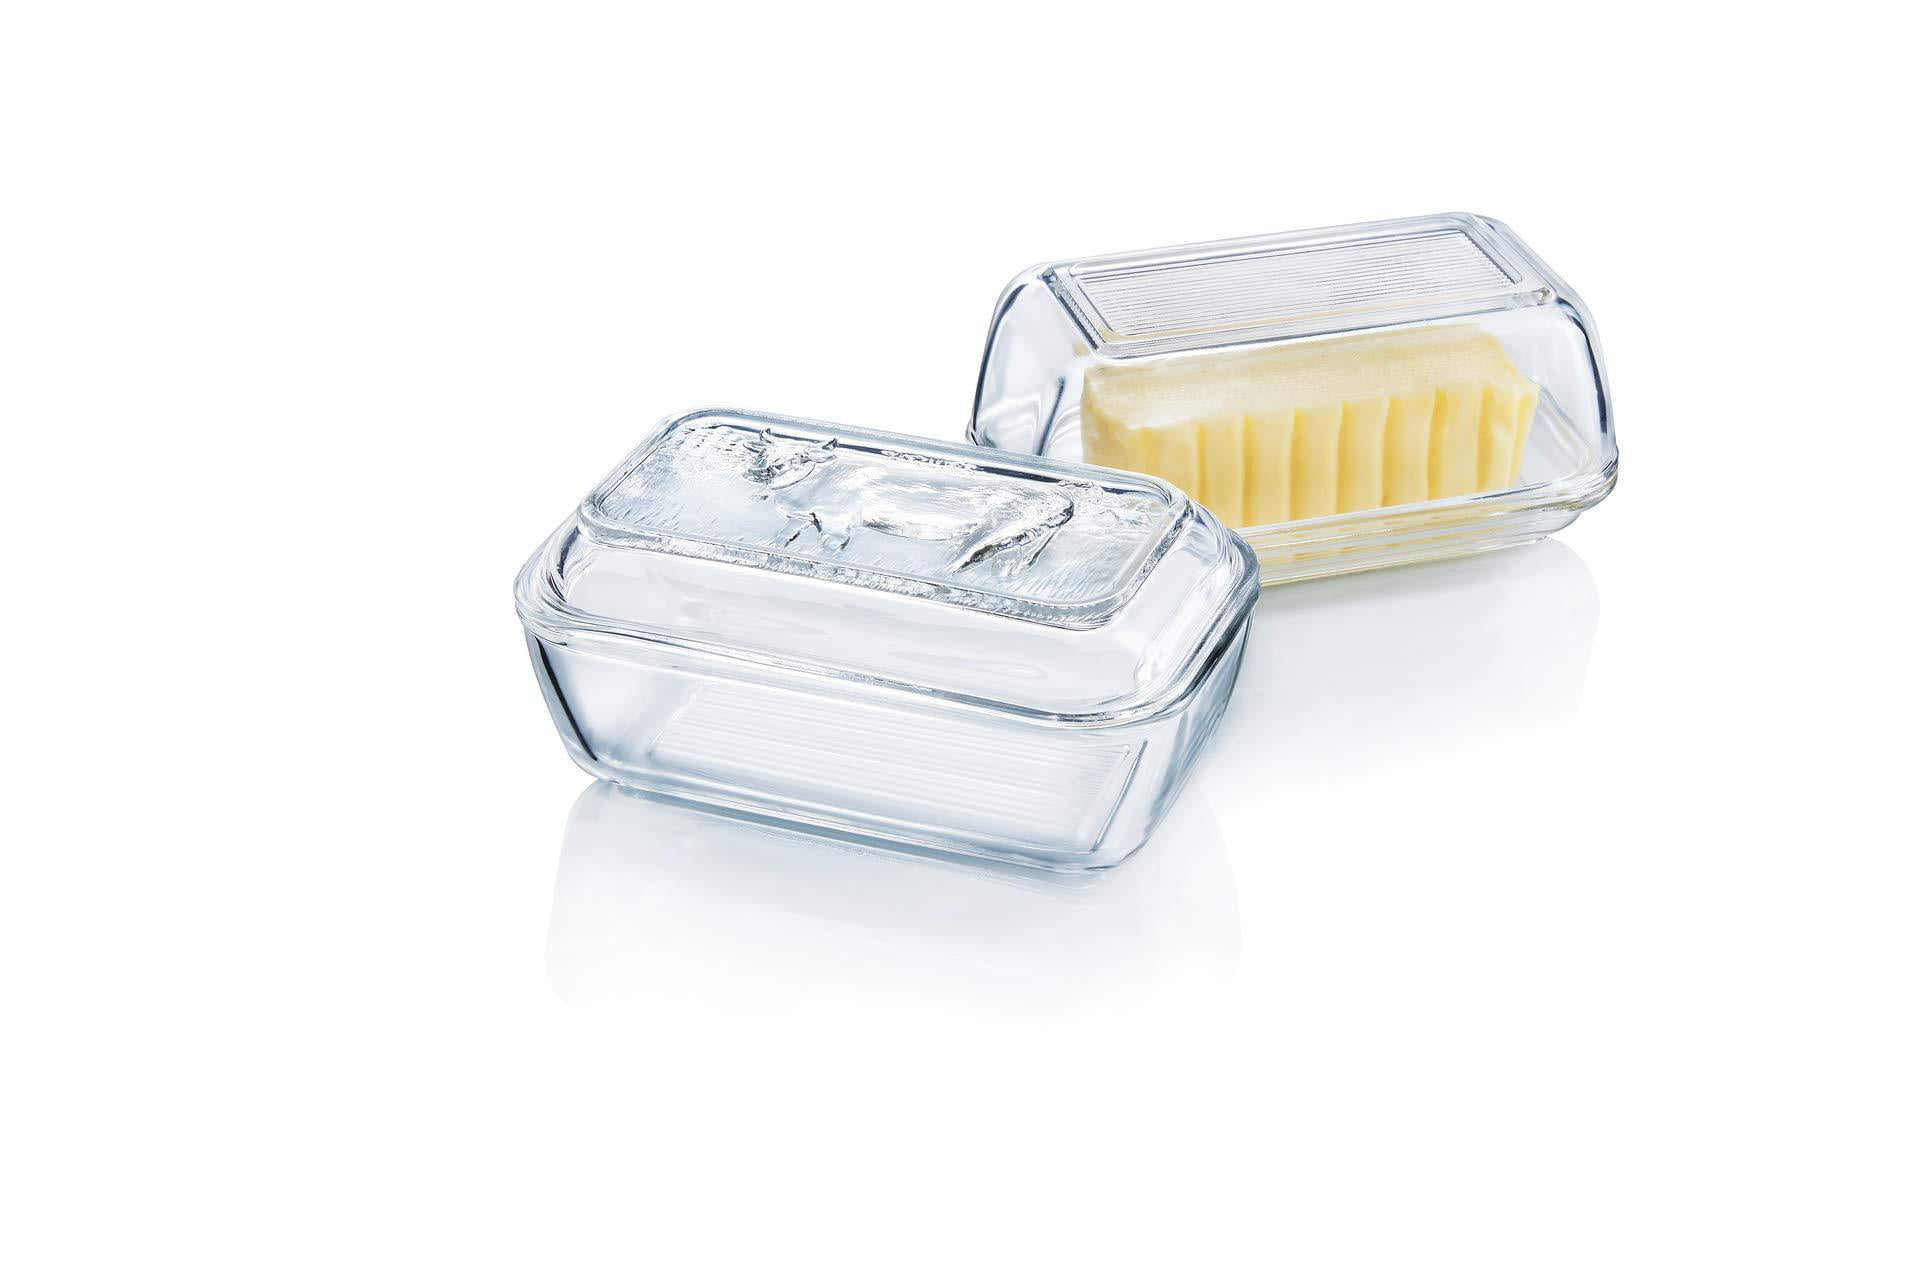 Arc International Luminarc Cow Butter Dish New 6-1/2-Inch by 2-3/4-Inch 